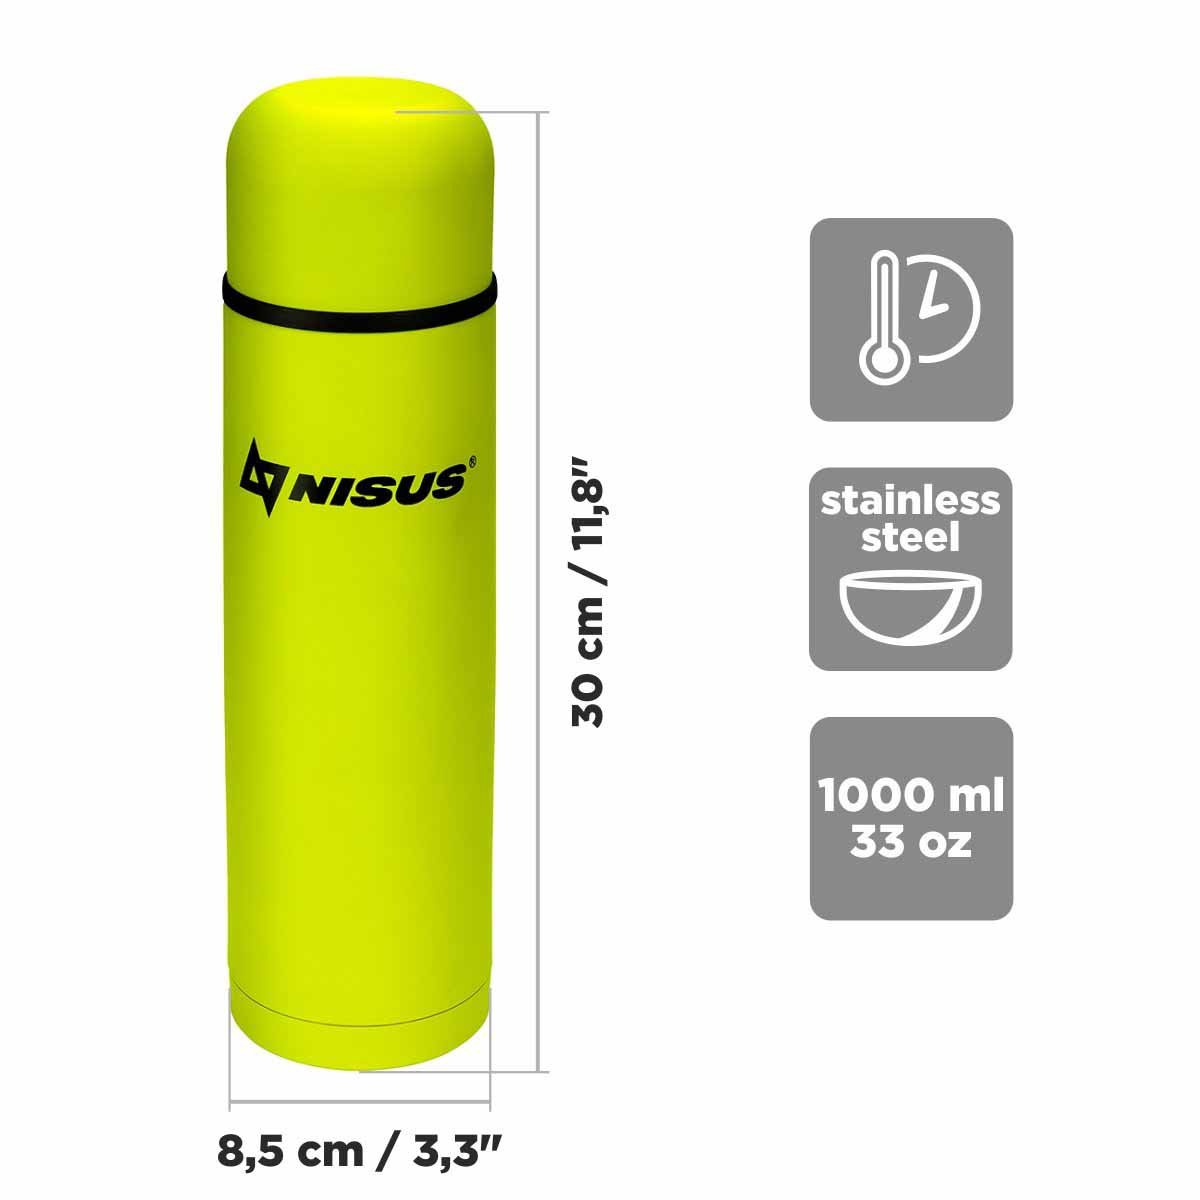 Compact Insulated Vacuum Flask with 2 Lid Cups, 33 oz, Limited Edition, lime is 11.8 inches high and 3.3 inches wide